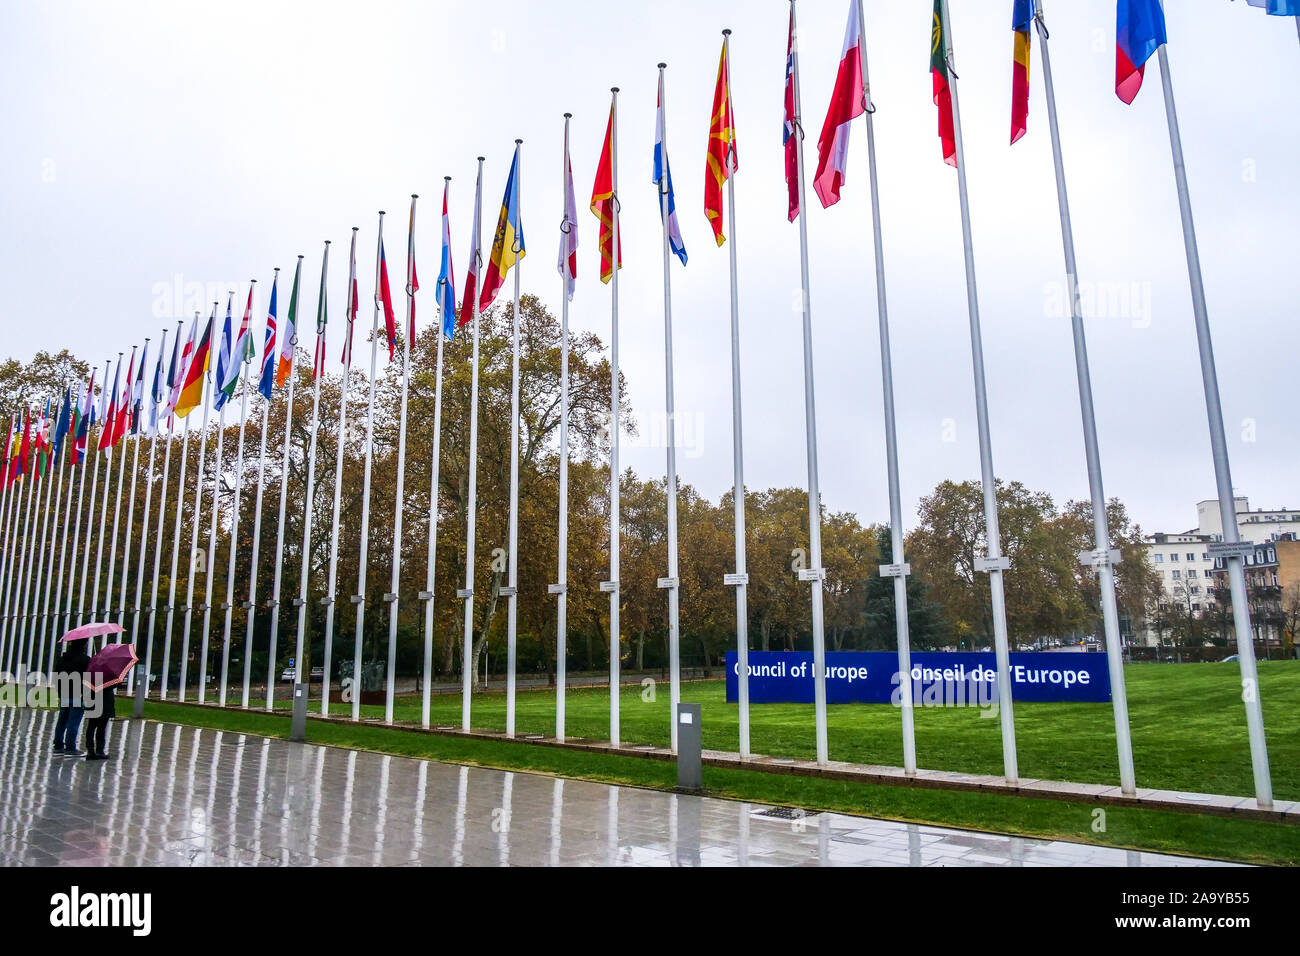 Council of Europe, Strasbourg, Alsace, France, Europe Stock Photo